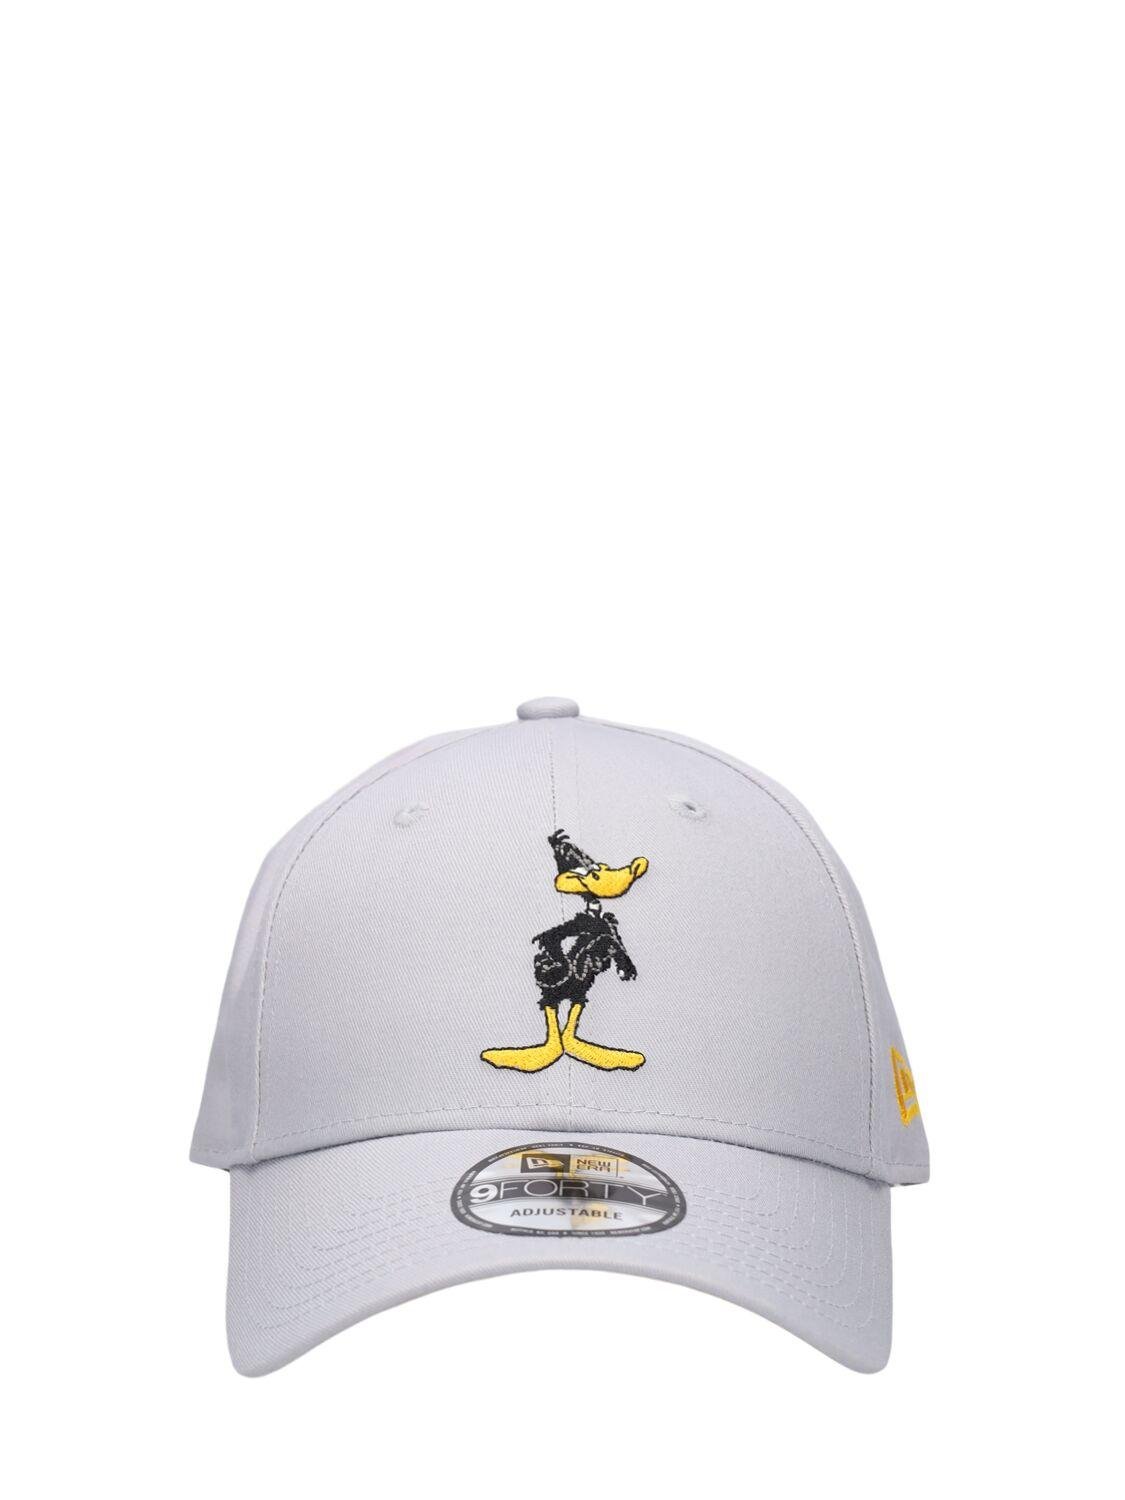 Duffy Duck Looney Tunes 9forty Cap by NEW ERA